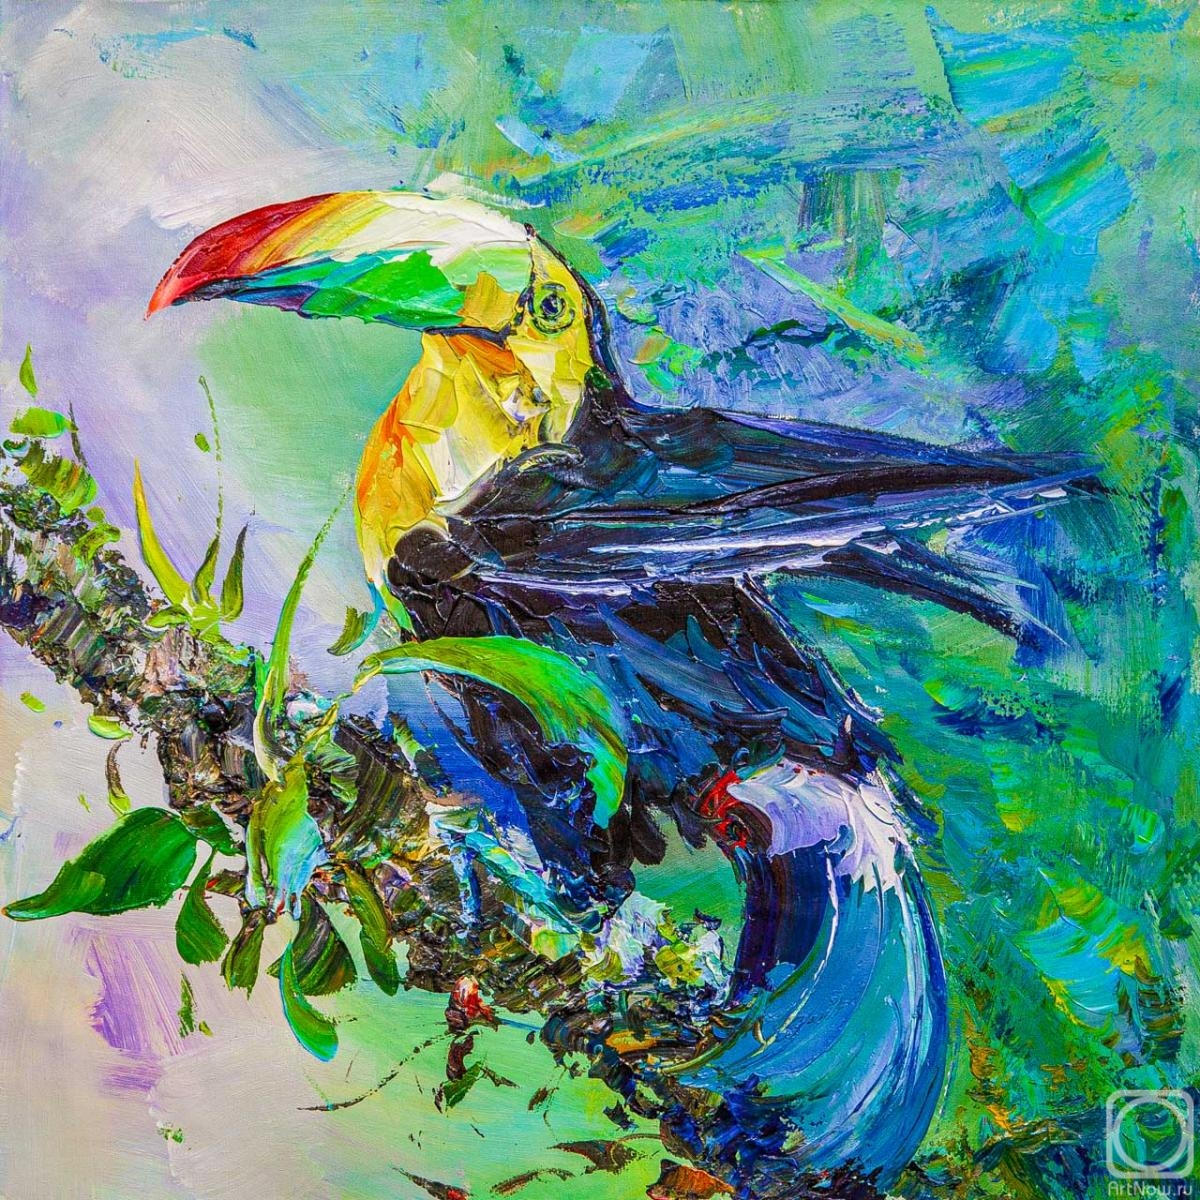 Rodries Jose. It's all about beauty. Toucan N4